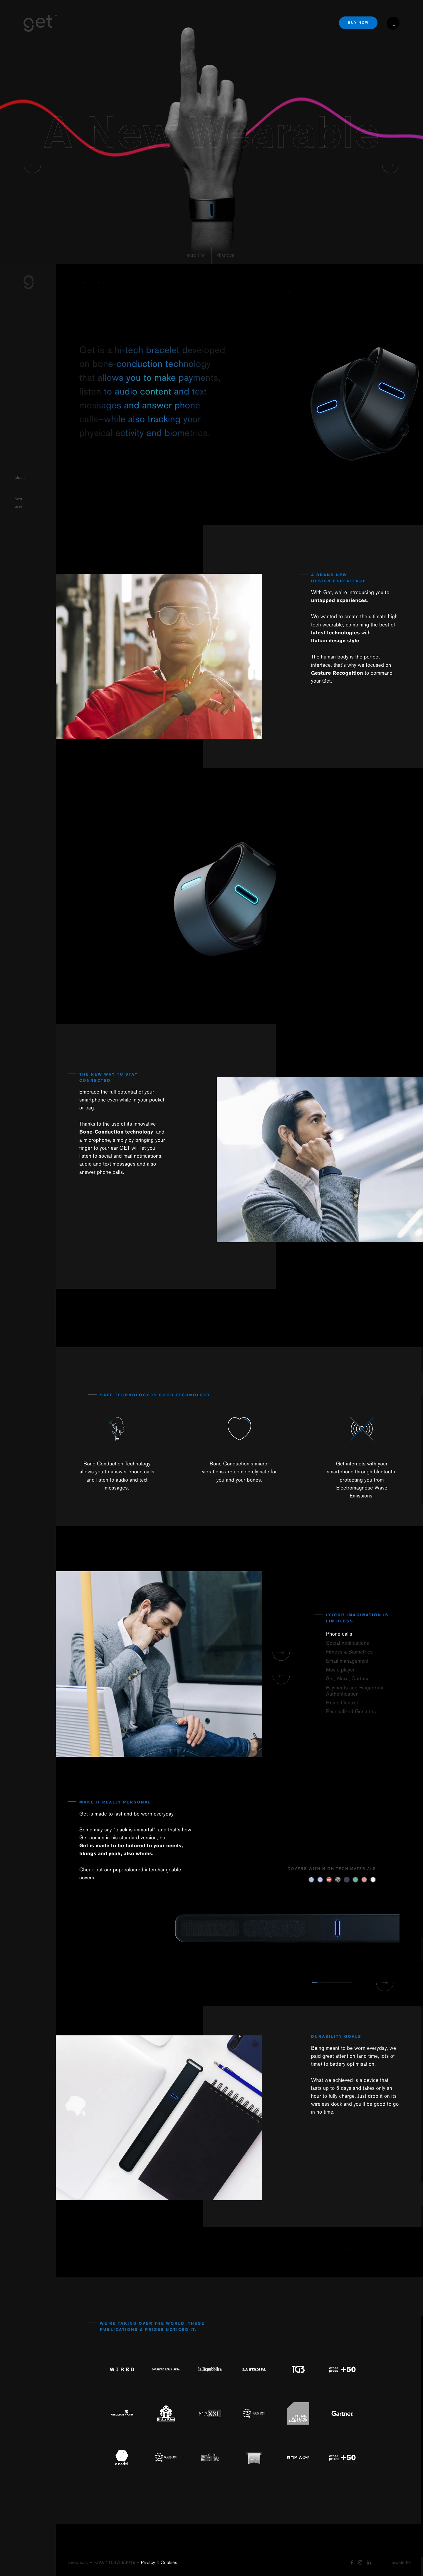 Get Wearable Landing Page Example: Get wearable is developed on bone-conduction technology. Make payments, listen to audio and text messages, answer calls, track your physical activity and biometrics.